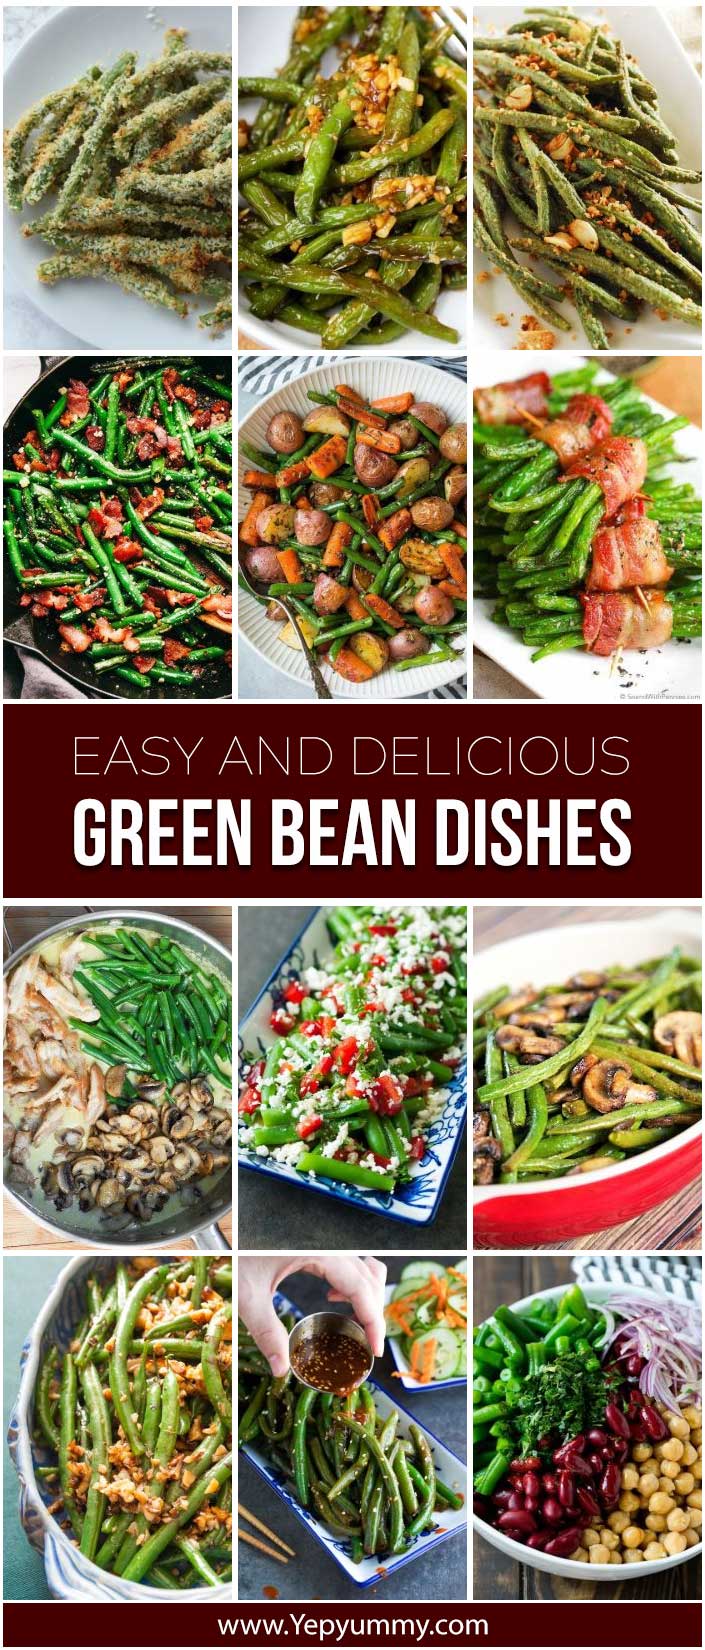 Easy And Delicious Green Bean Dishes